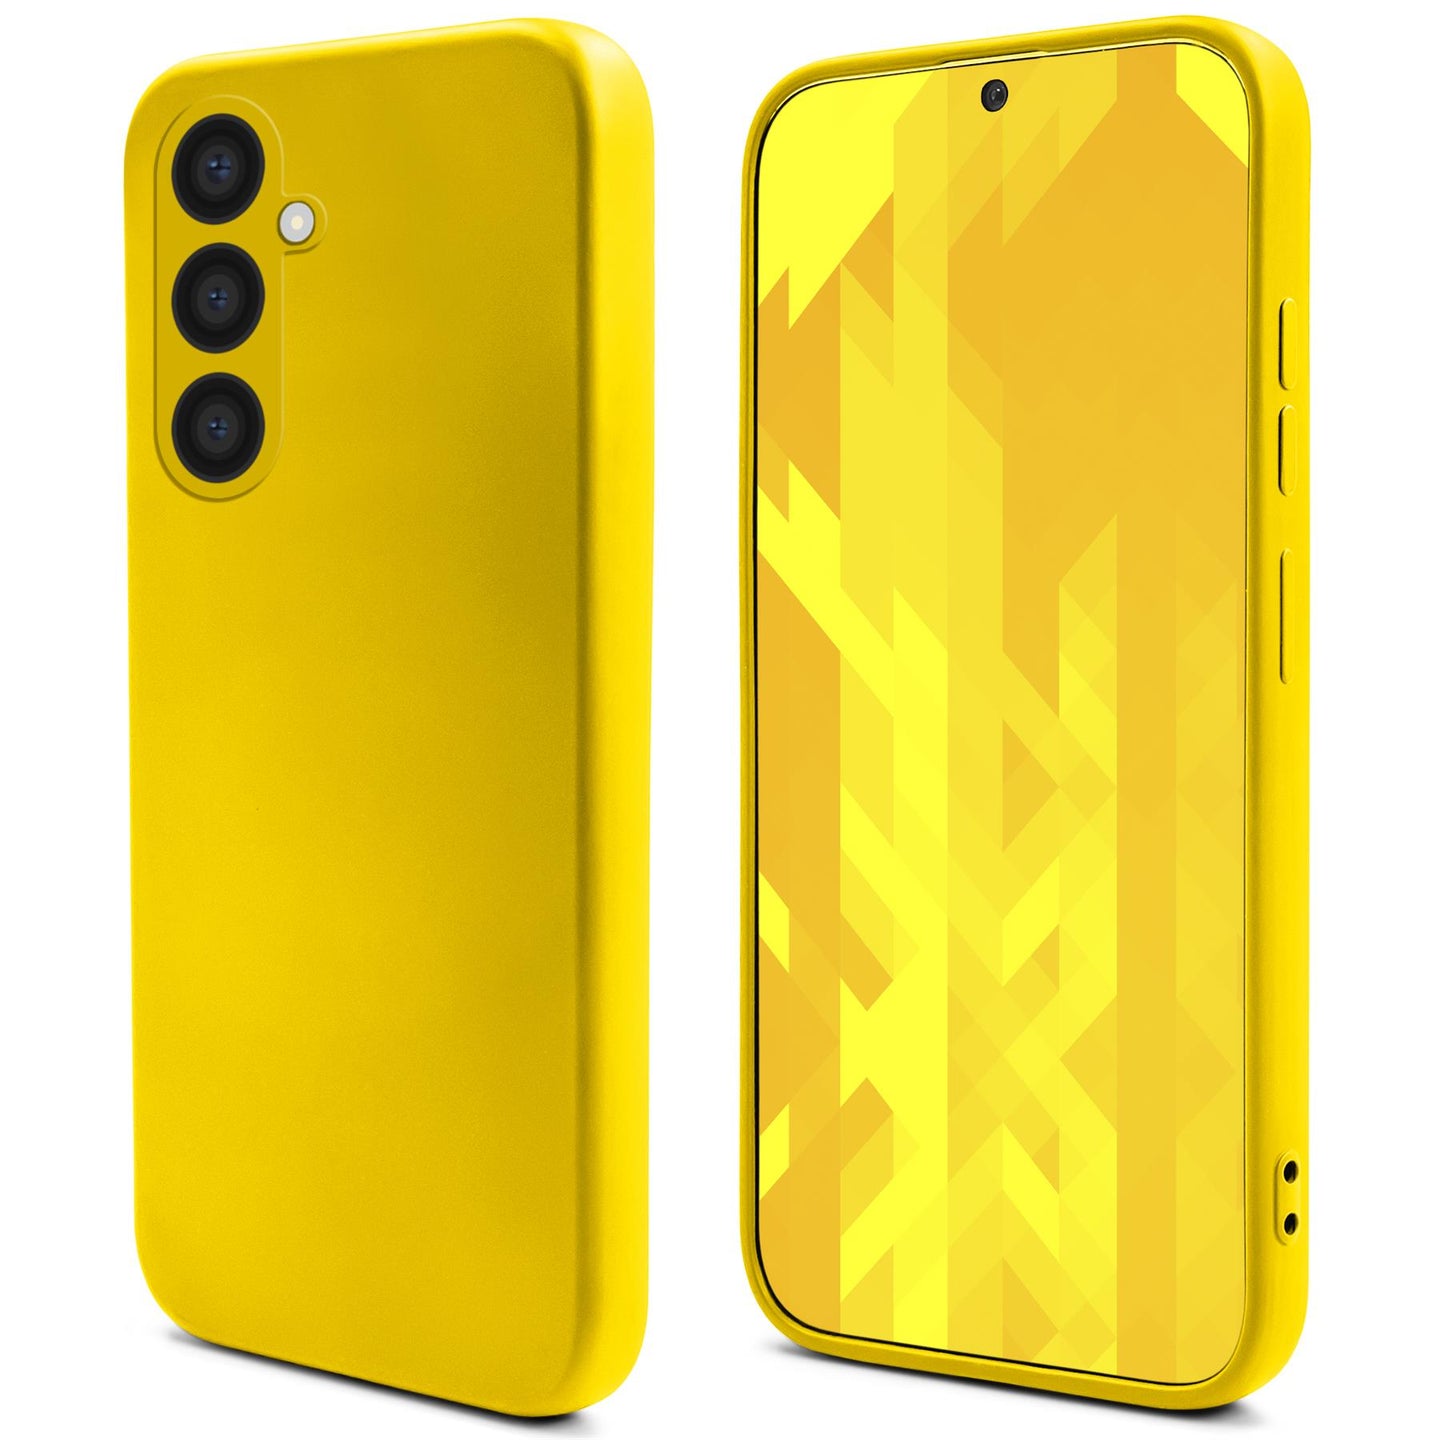 Moozy Lifestyle. Silicone Case for Samsung A54 5G, Yellow - Liquid Silicone Lightweight Cover with Matte Finish and Soft Microfiber Lining, Premium Silicone Case